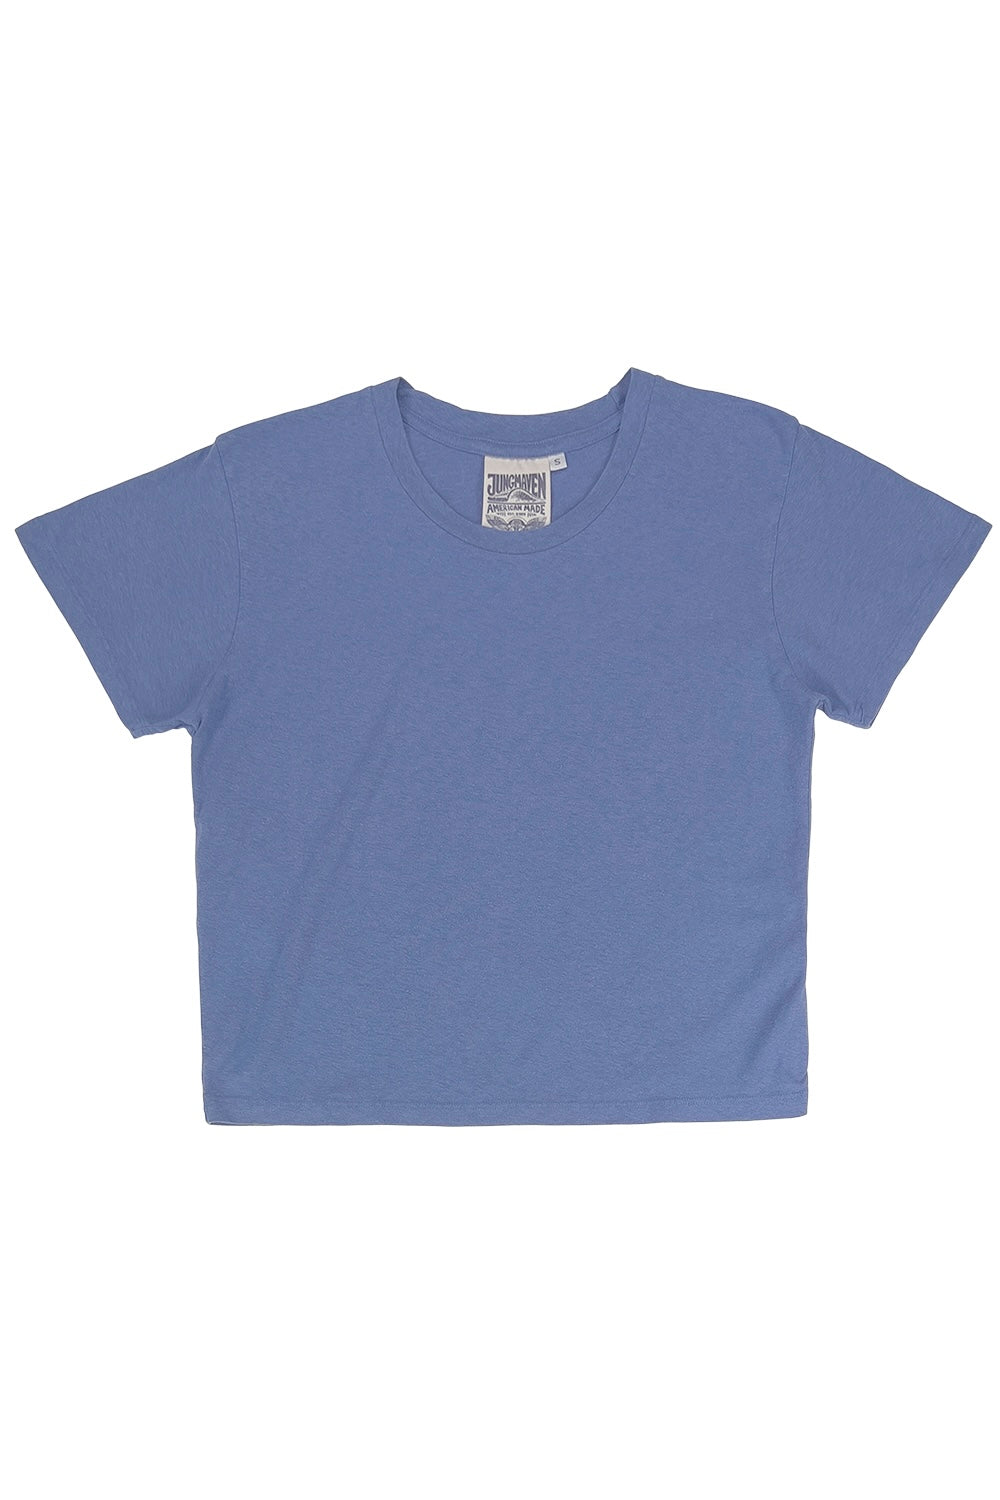 Cropped Lorel Tee | Jungmaven Hemp Clothing & Accessories / Color: Wisteria